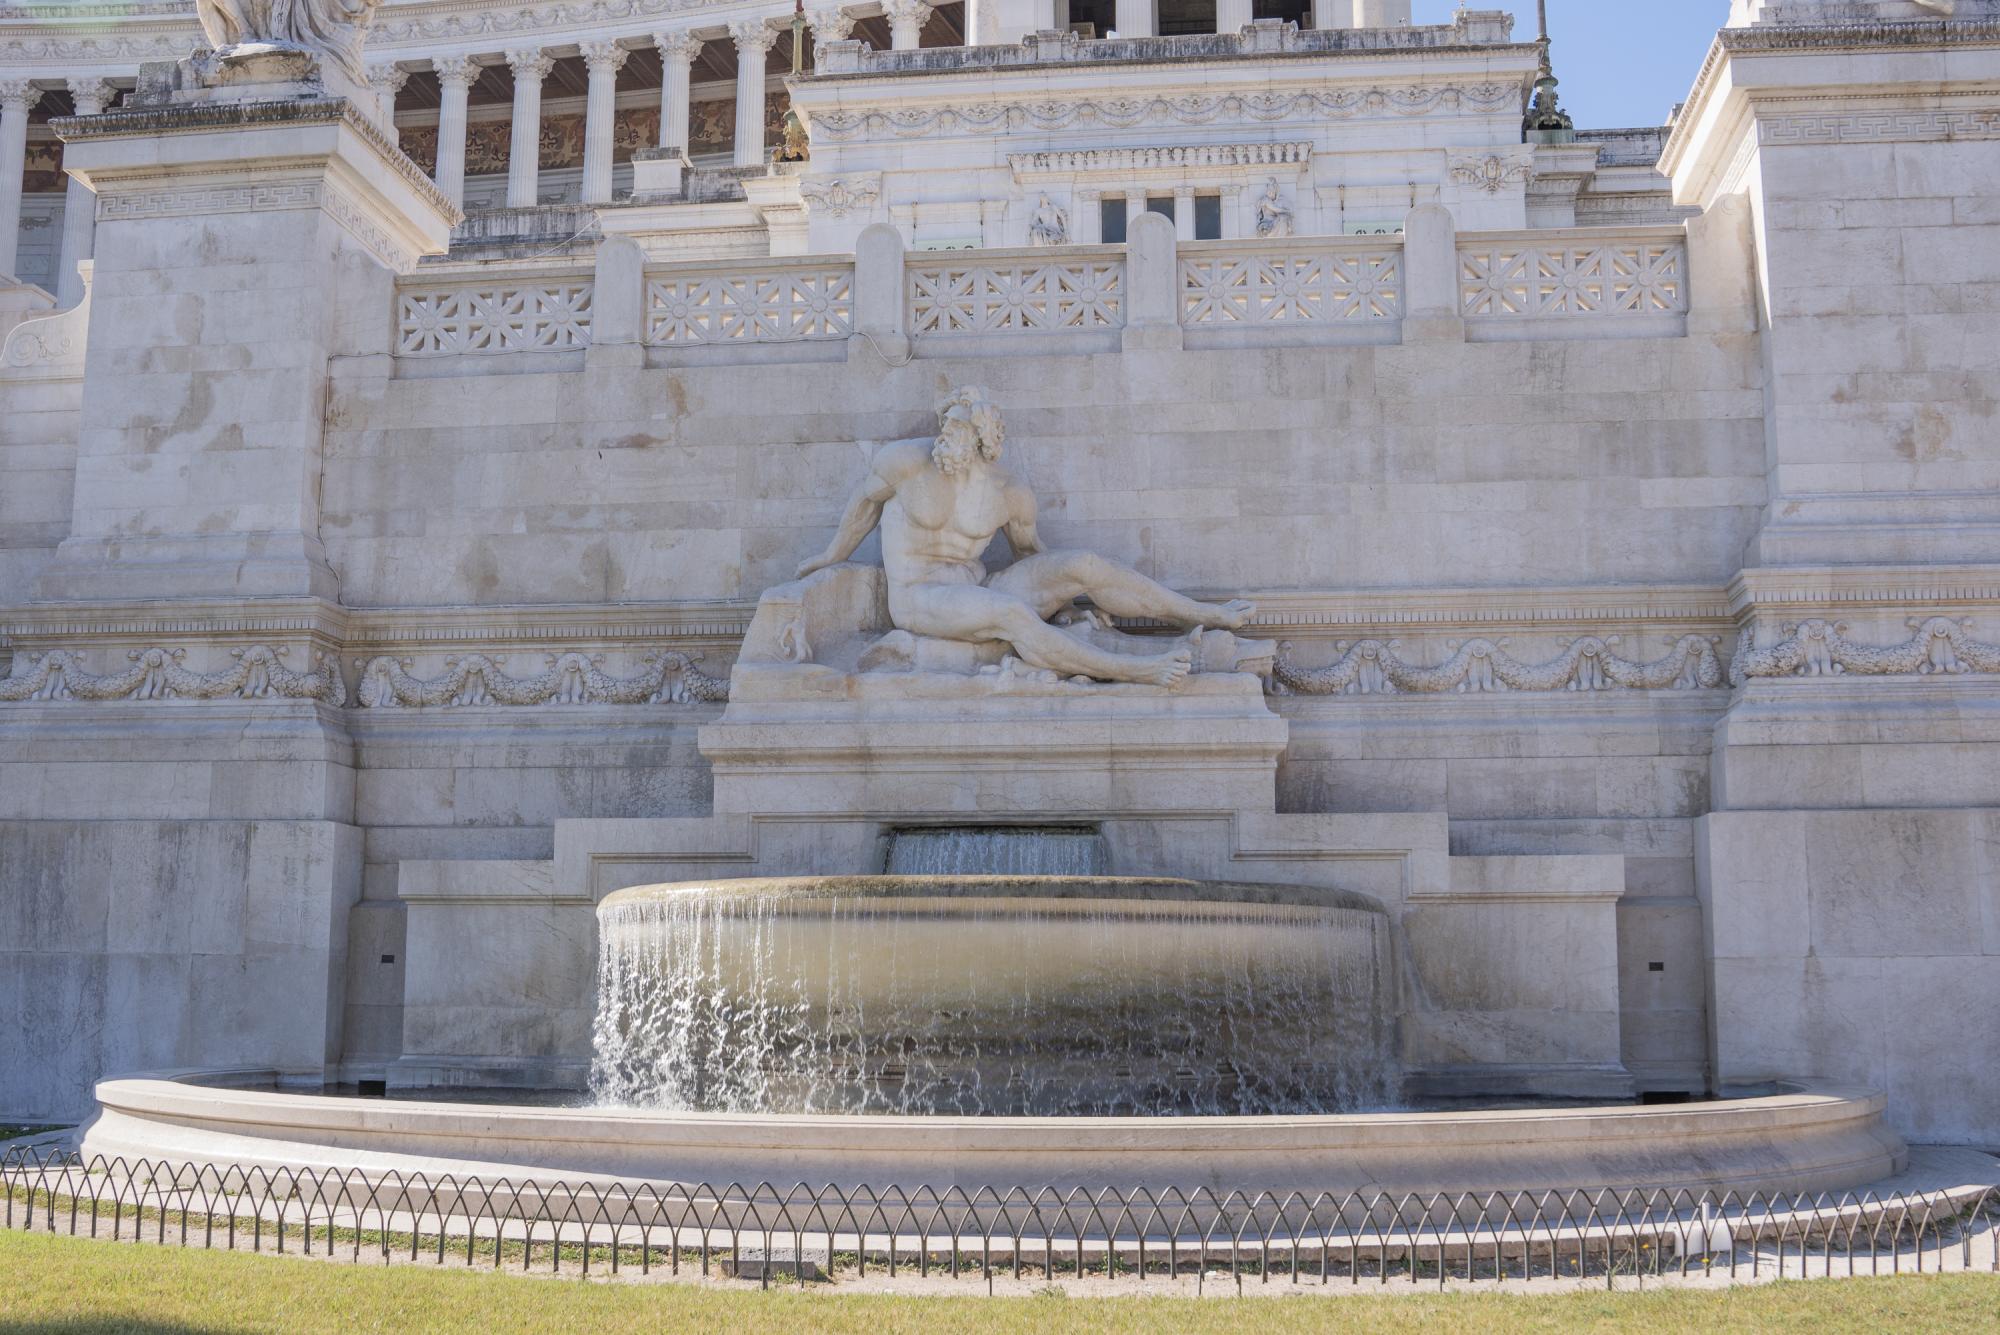 The Il Mar Tirreno fountain after the completion of restoration work.
